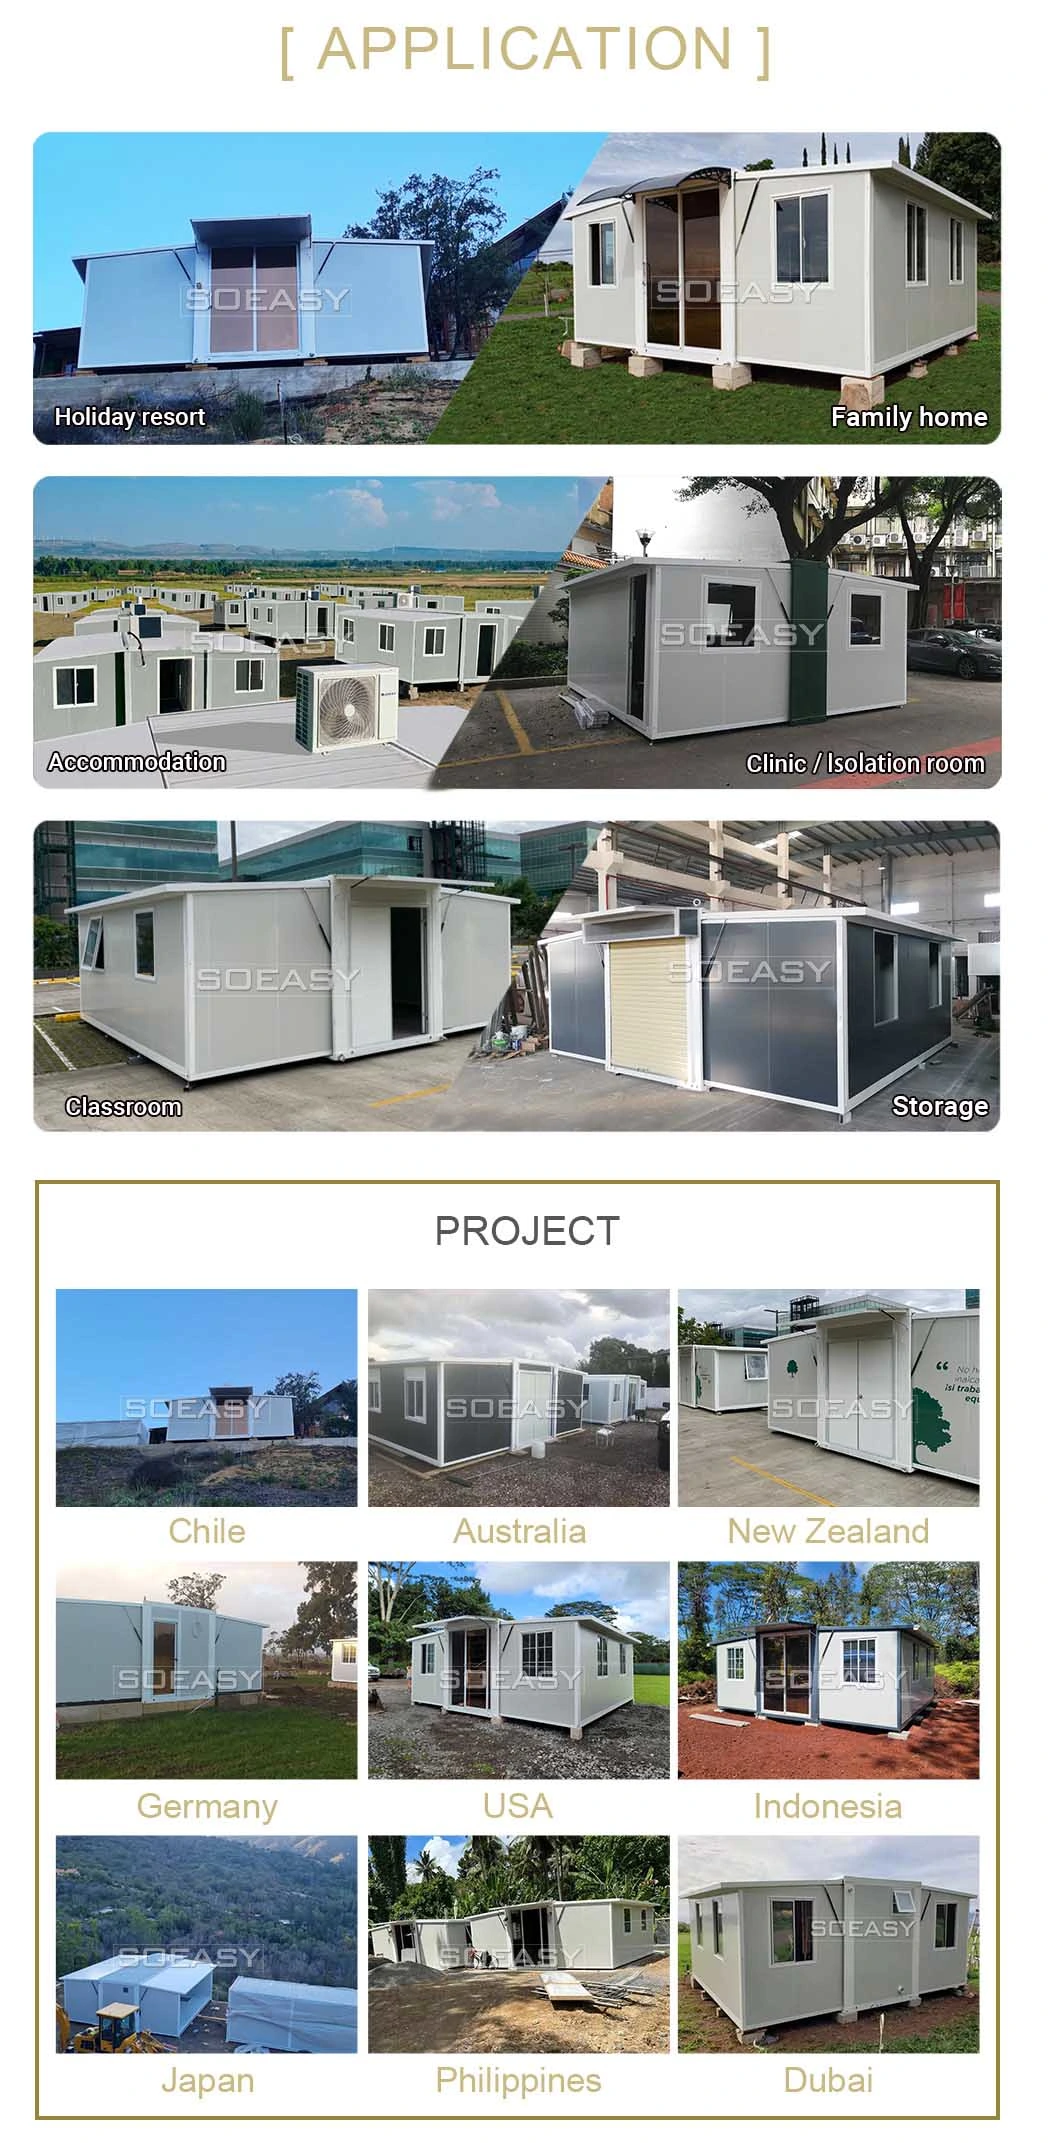 Fold out Expanding Tiny House Mobile Modular Shipping Double Bedroom Holiday House Container Prefabricated Prefab Resort Portable Home Farm House